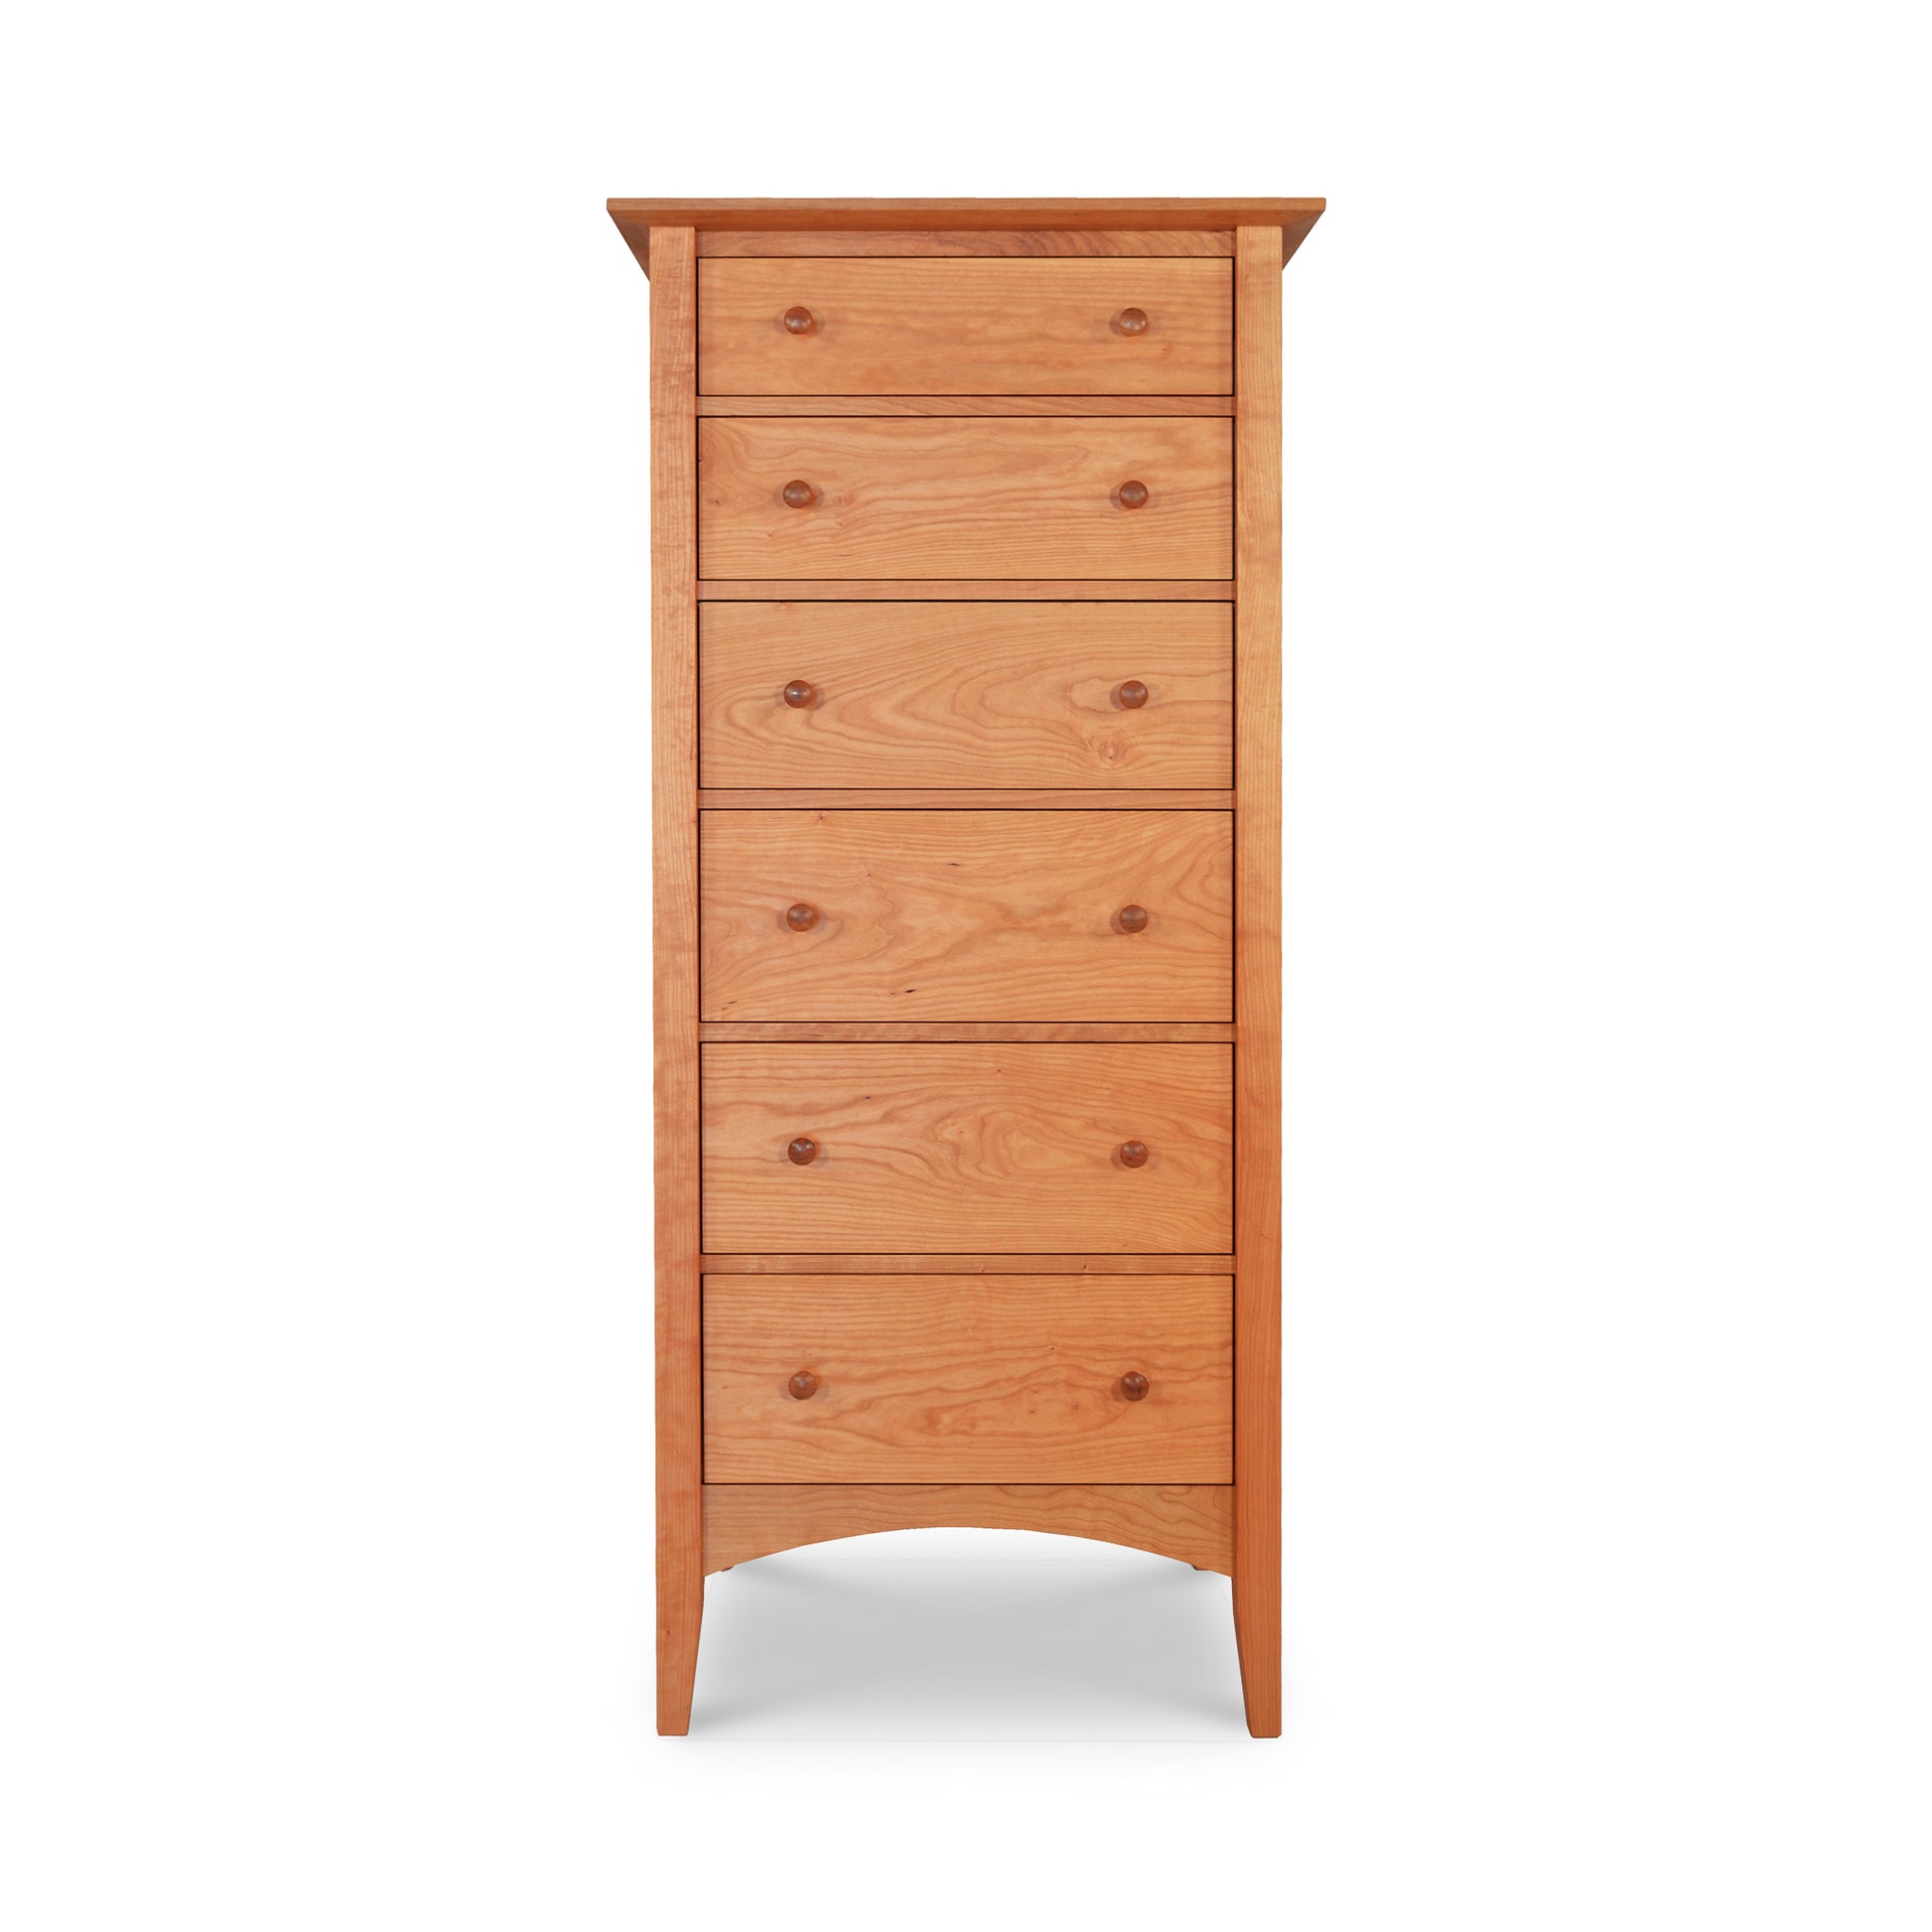 A tall American Shaker Lingerie Chest from the Maple Corner Woodworks Collection with seven drawers, featuring a simple, elegant design with a smooth finish and rounded handles, isolated on a white background.